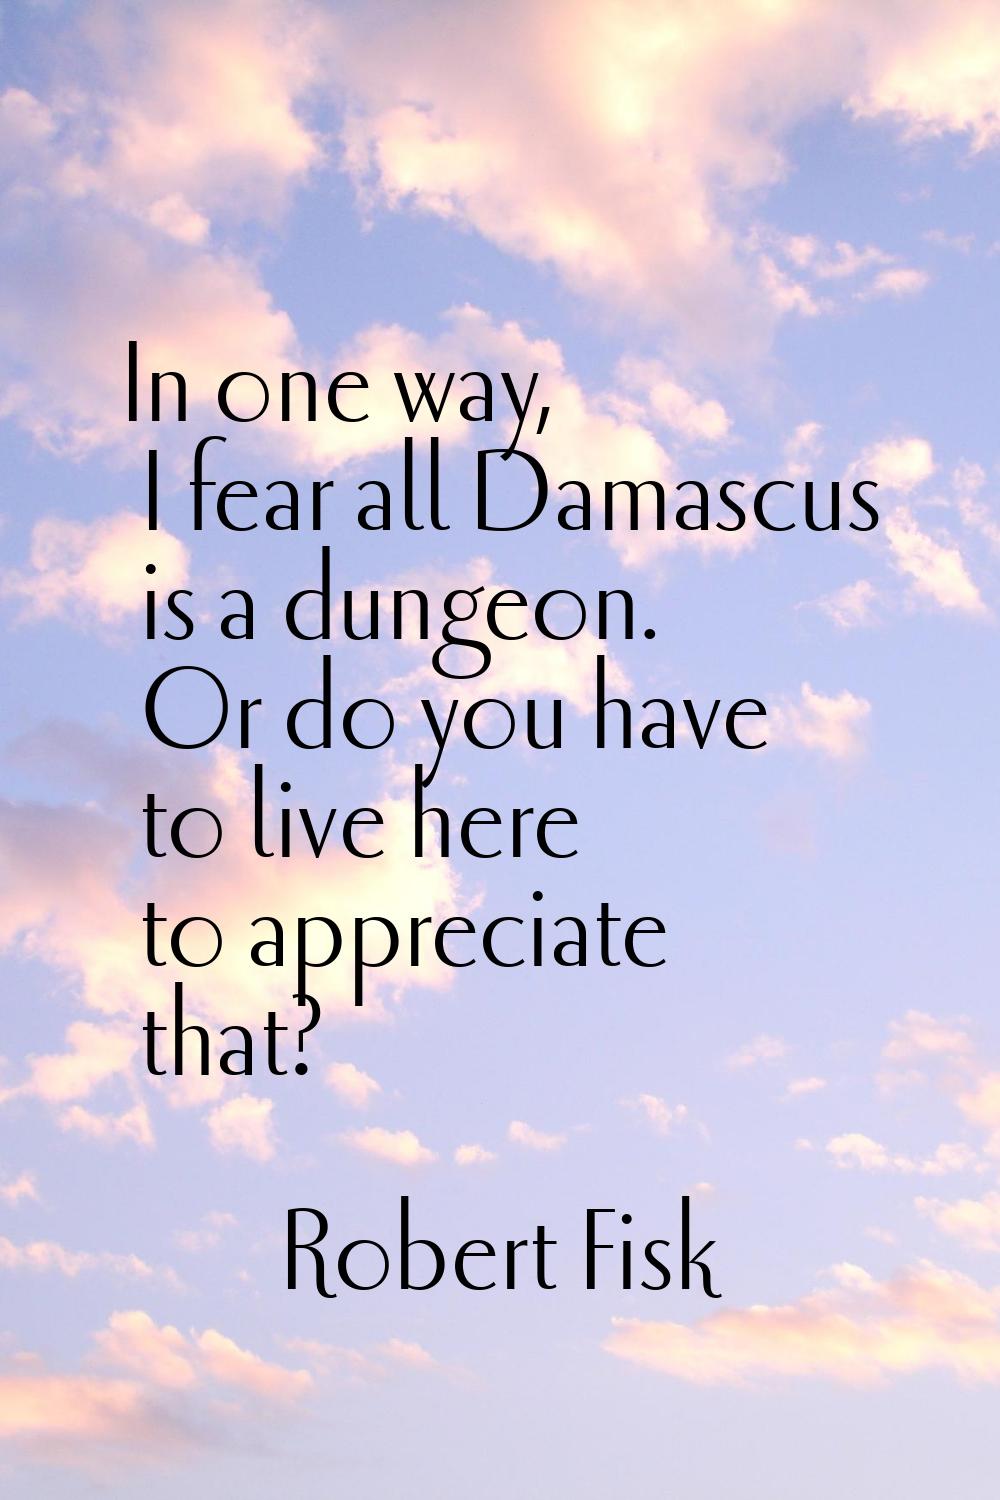 In one way, I fear all Damascus is a dungeon. Or do you have to live here to appreciate that?